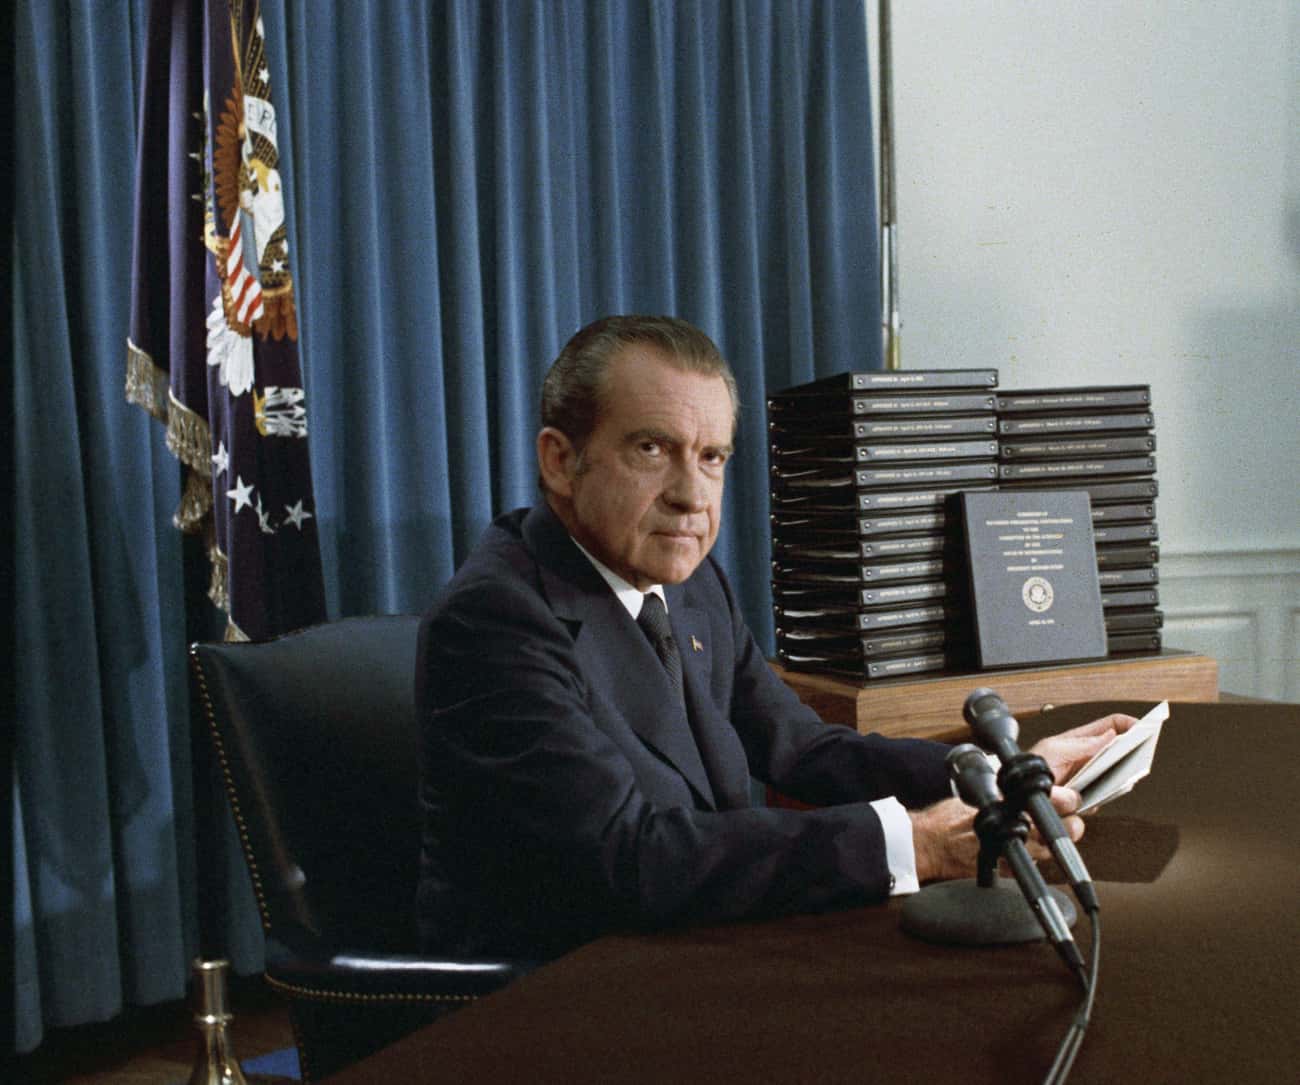 Why Did Nixon Have To Have This Ready?